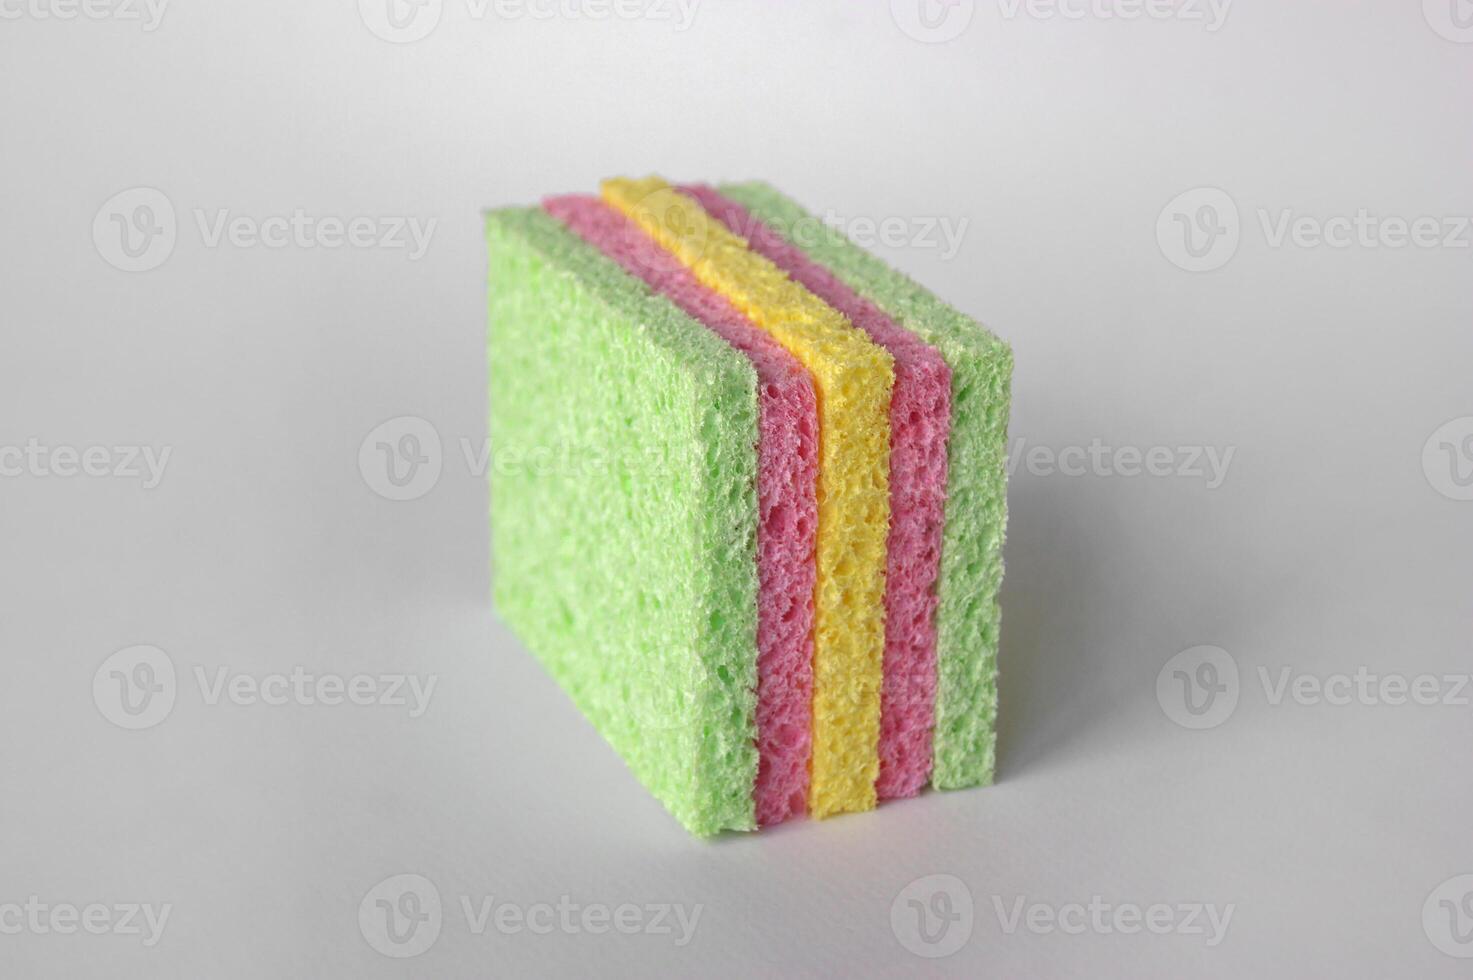 Bright colored sponges for washing dishes, cleaning the bathroom and other household needs. photo